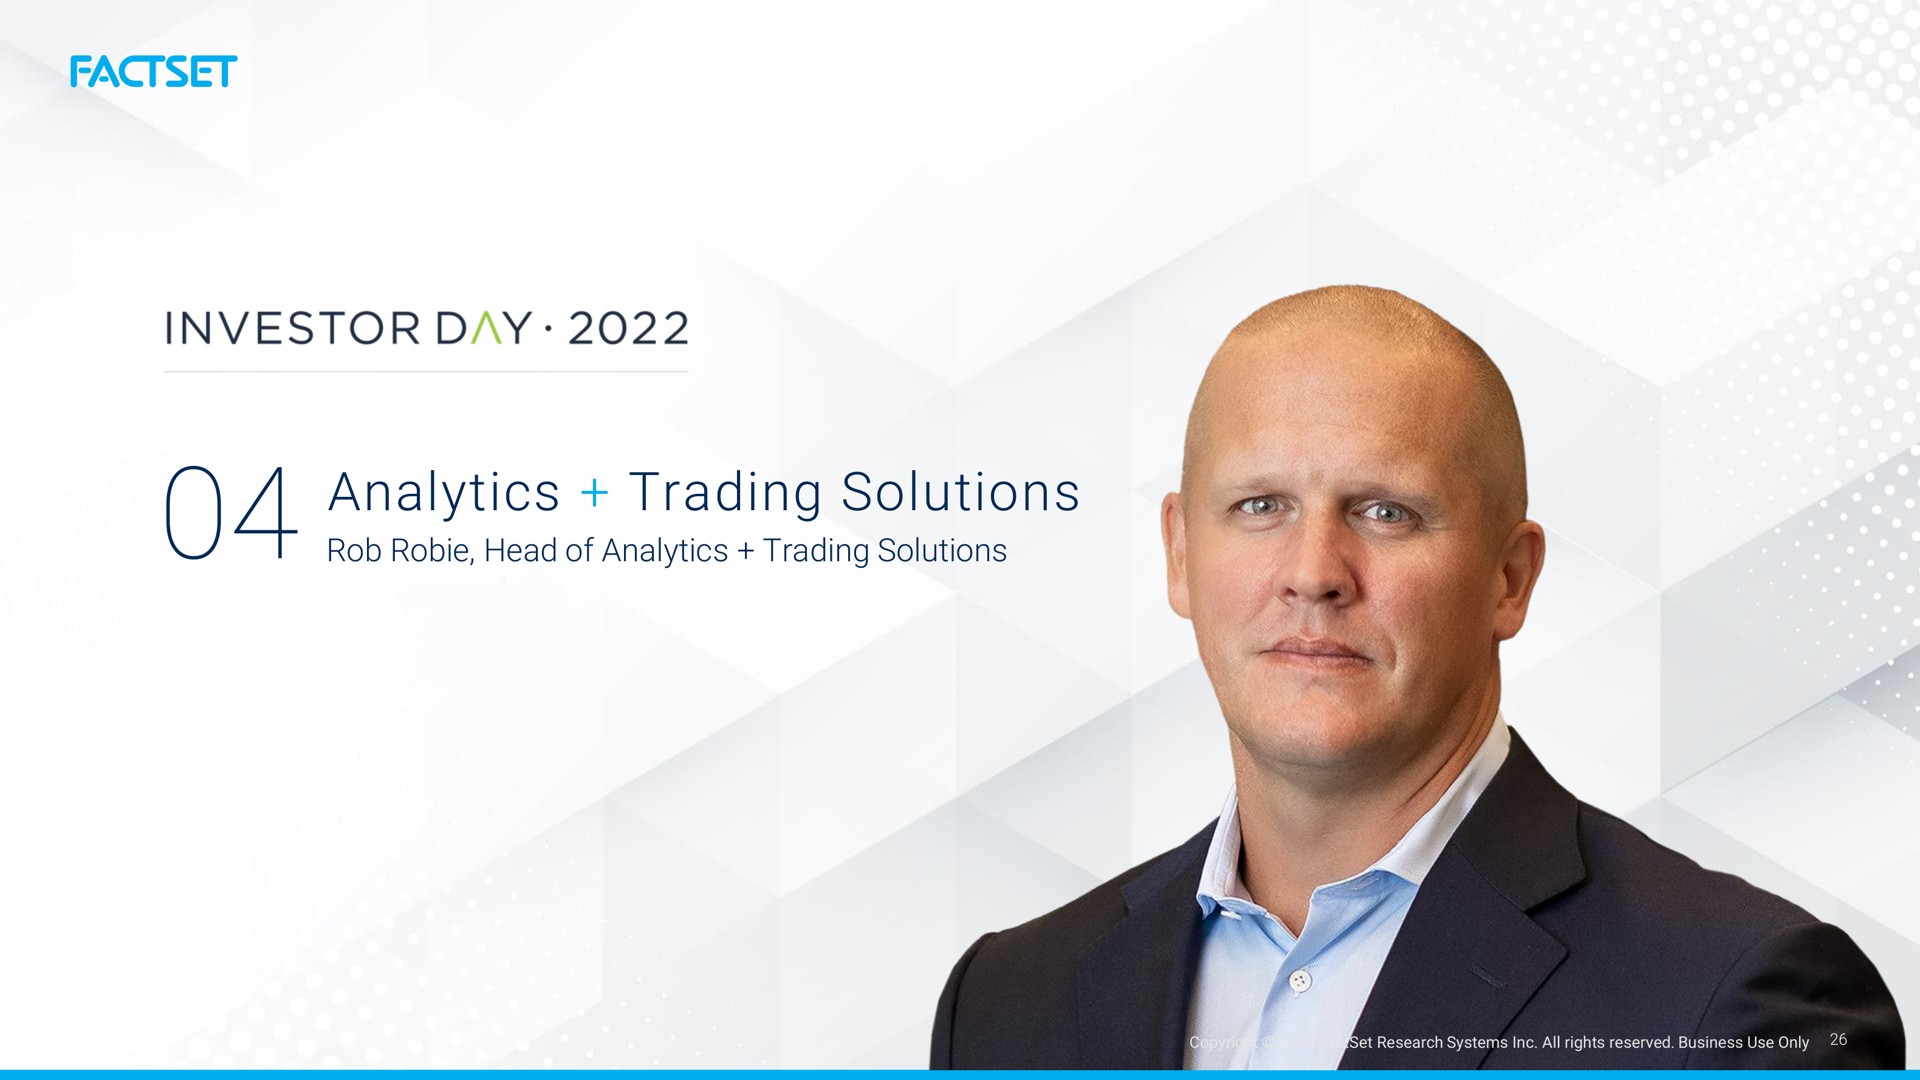 analytics trading solutions investor day | Factset